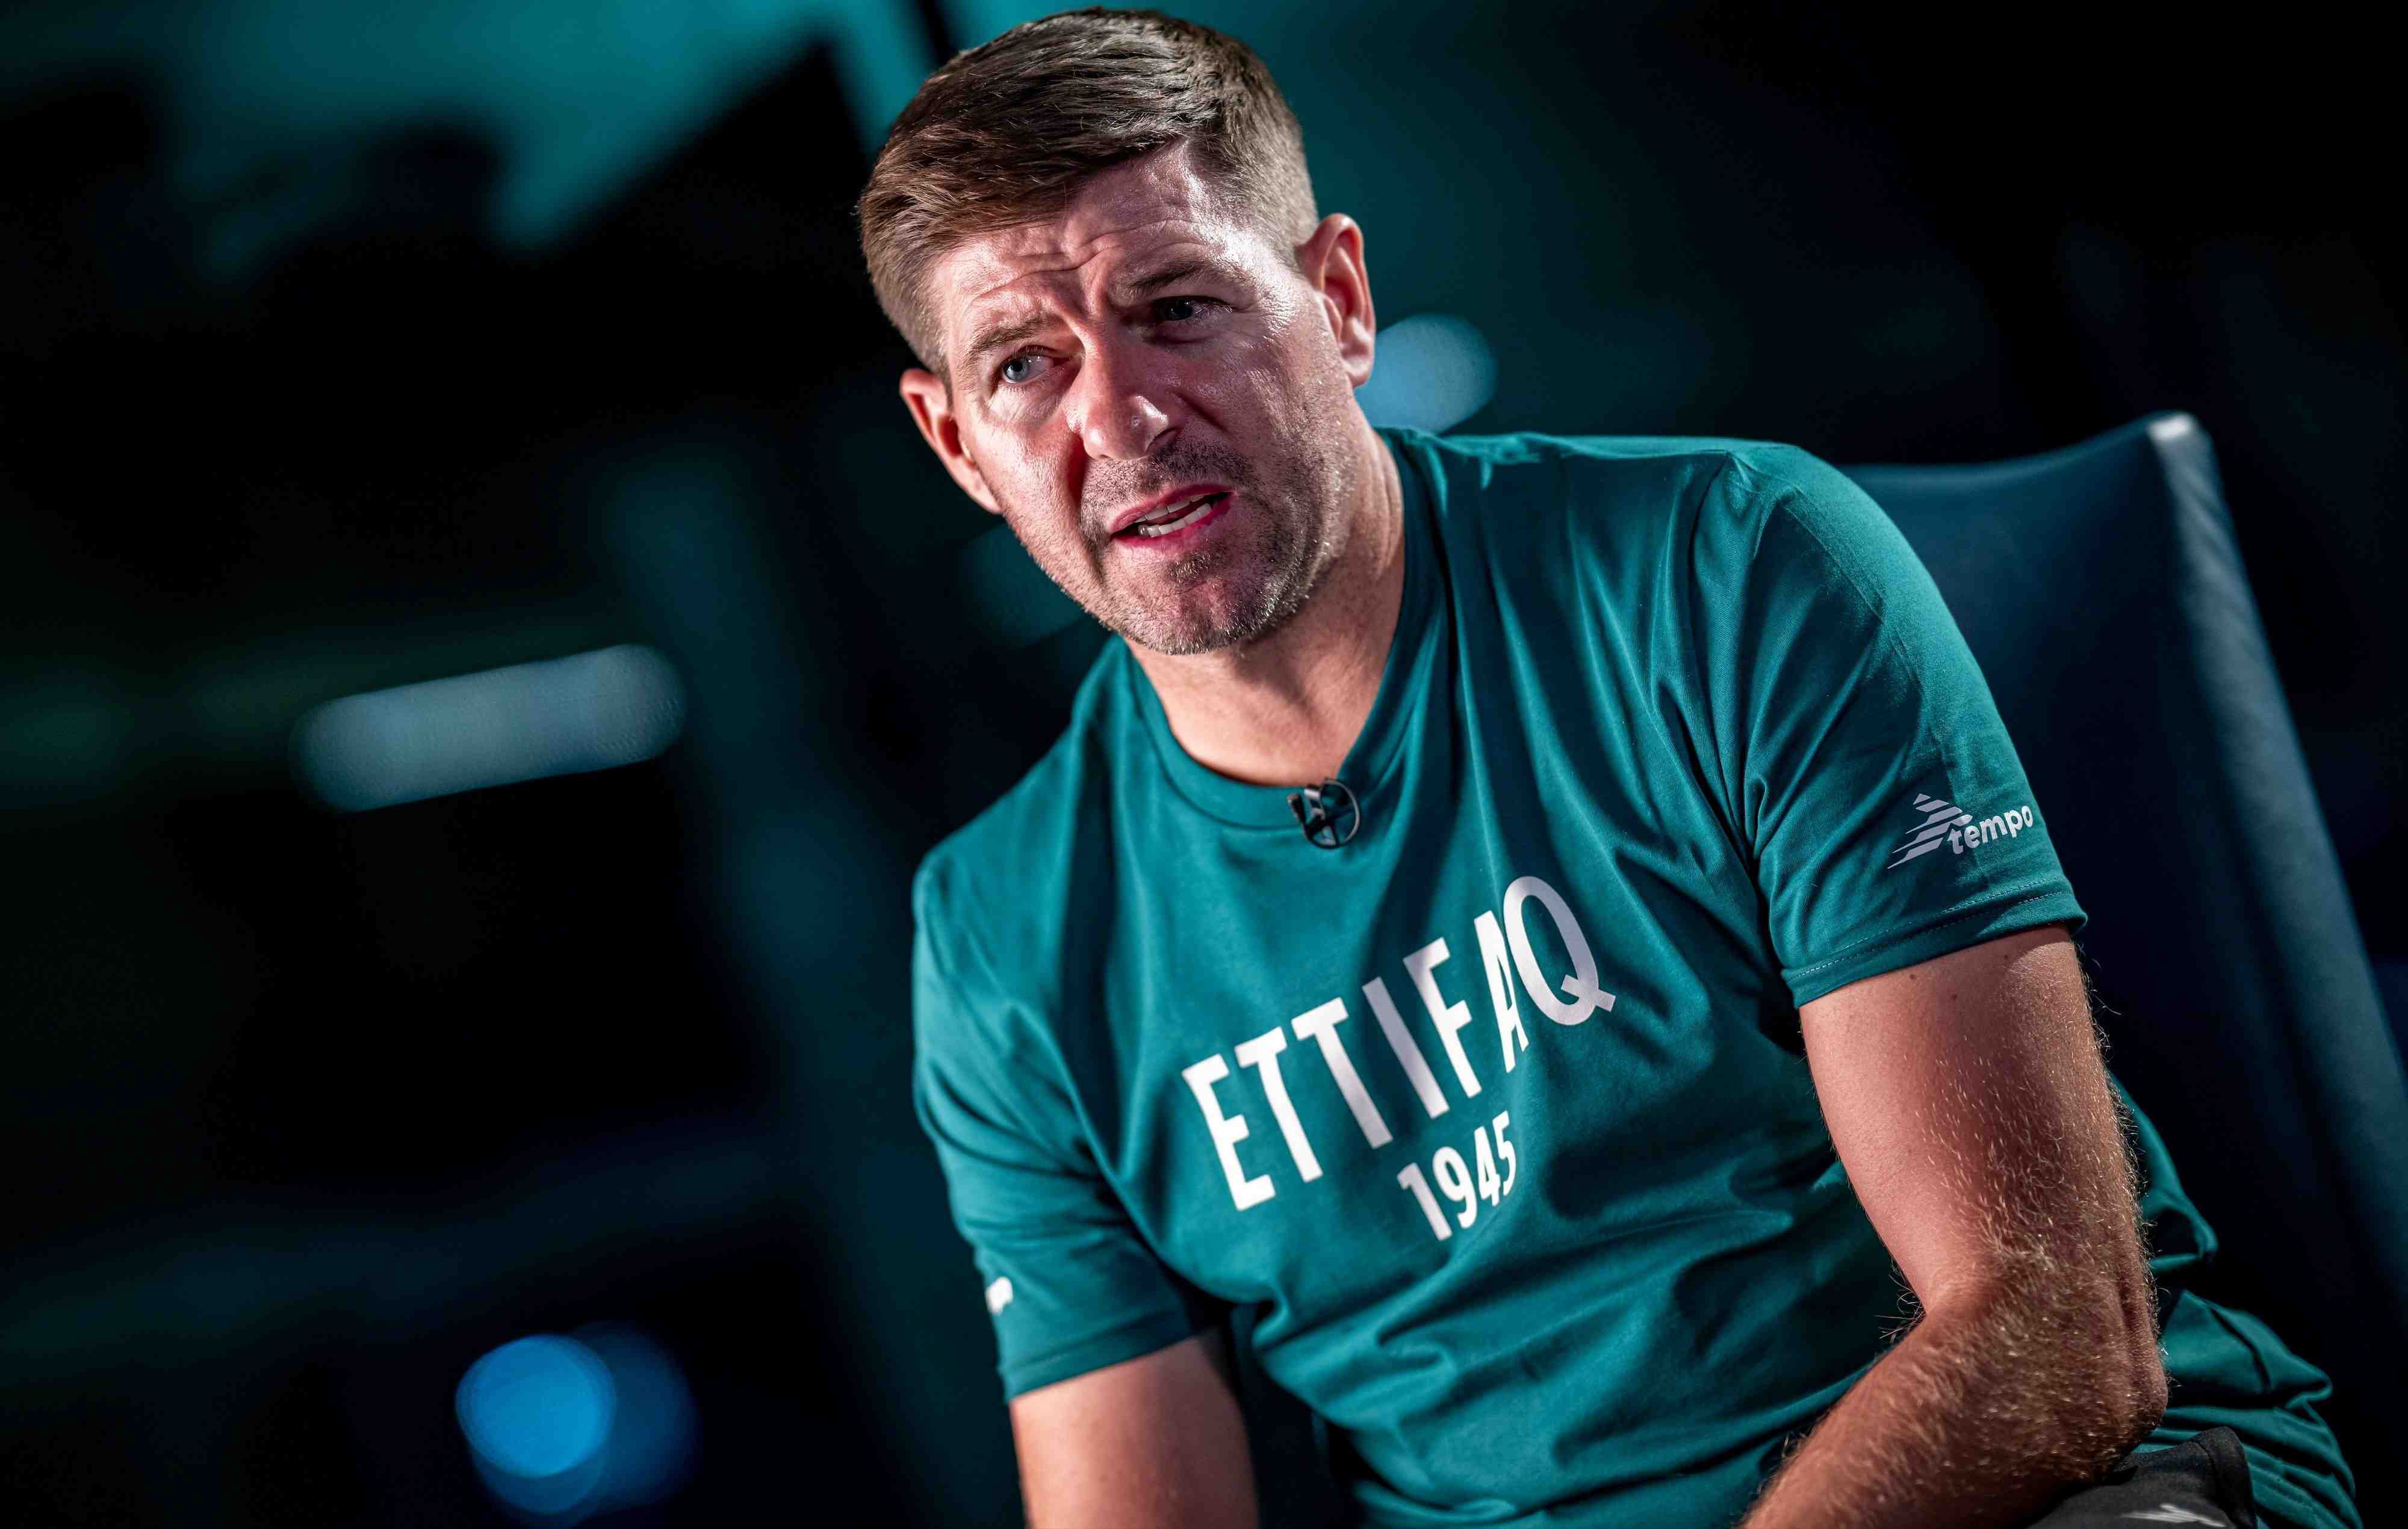 Steven Gerrard discusses football, family, and future aspirations